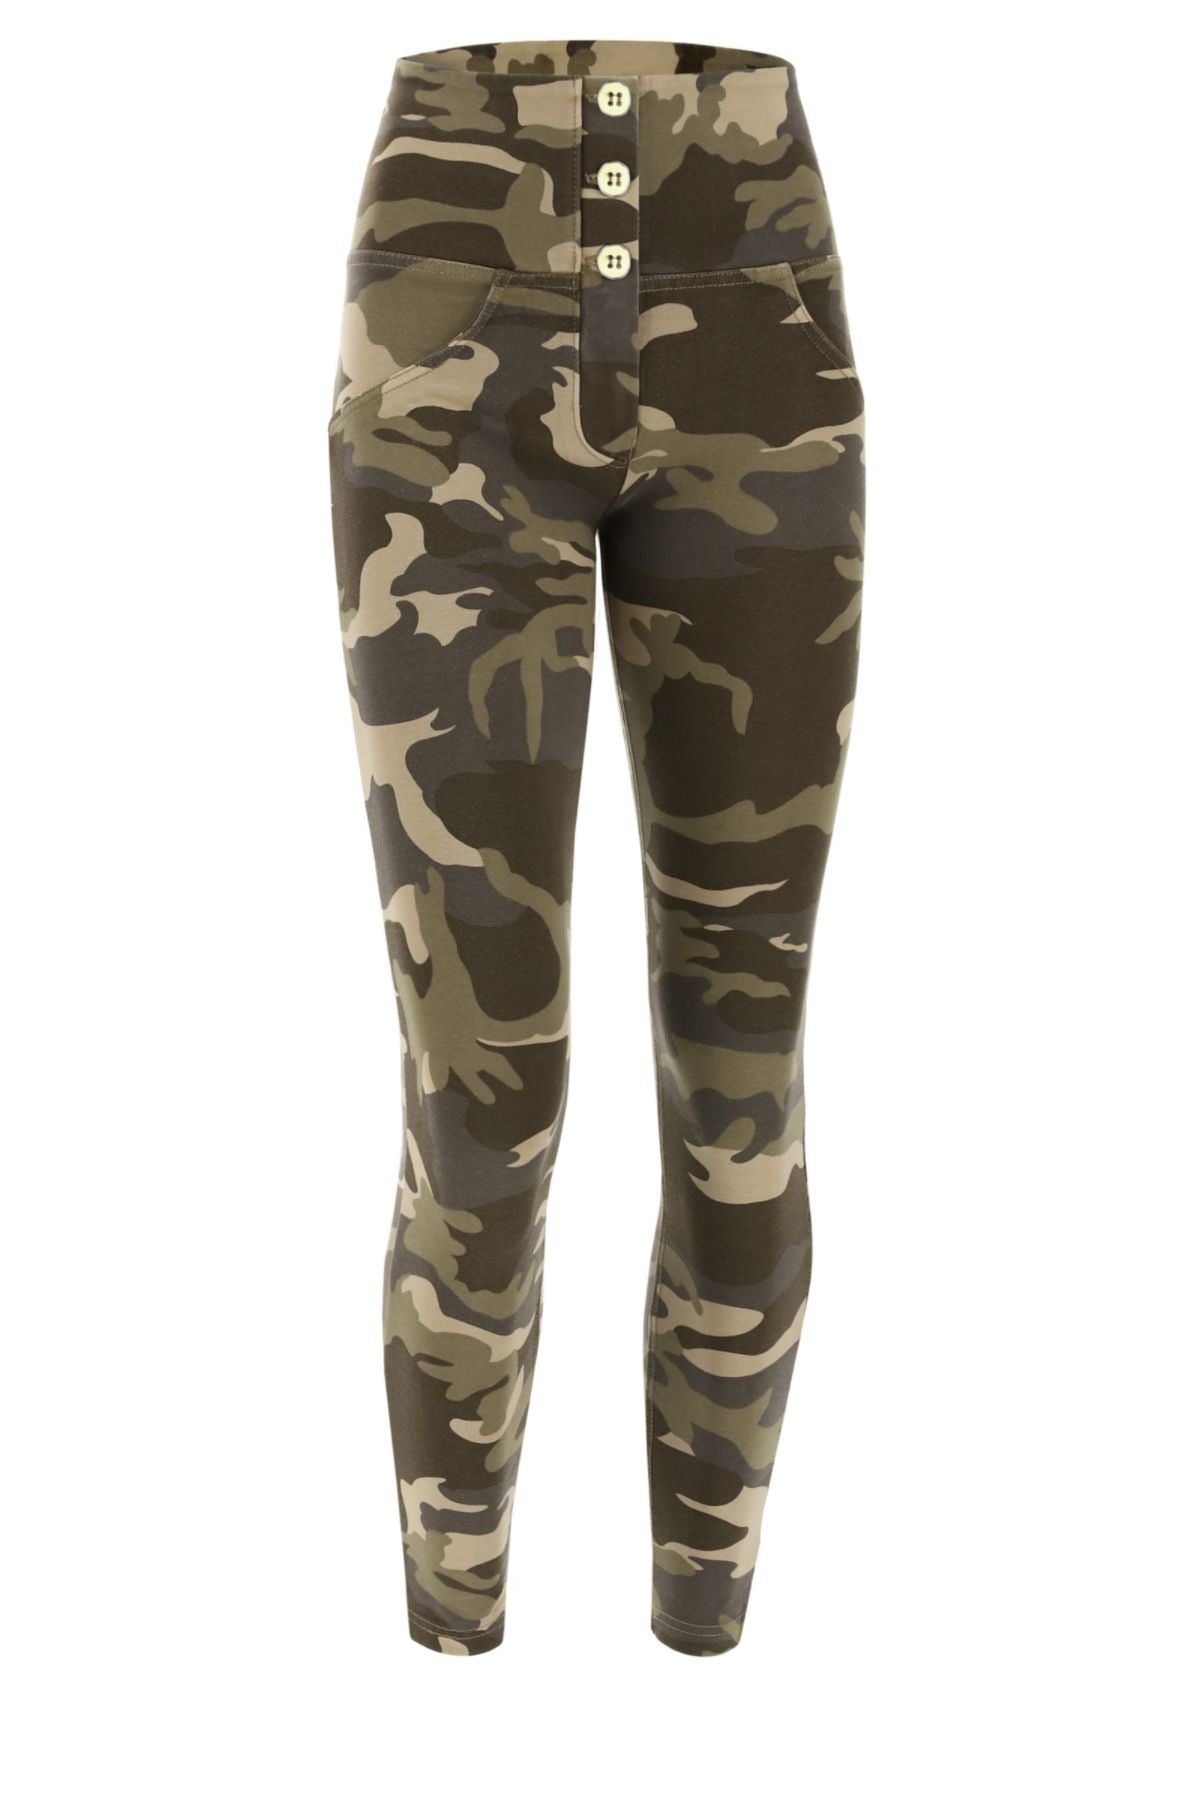 Twisted Tailor Vallely skinny fit suit pants in dark green camo | ASOS